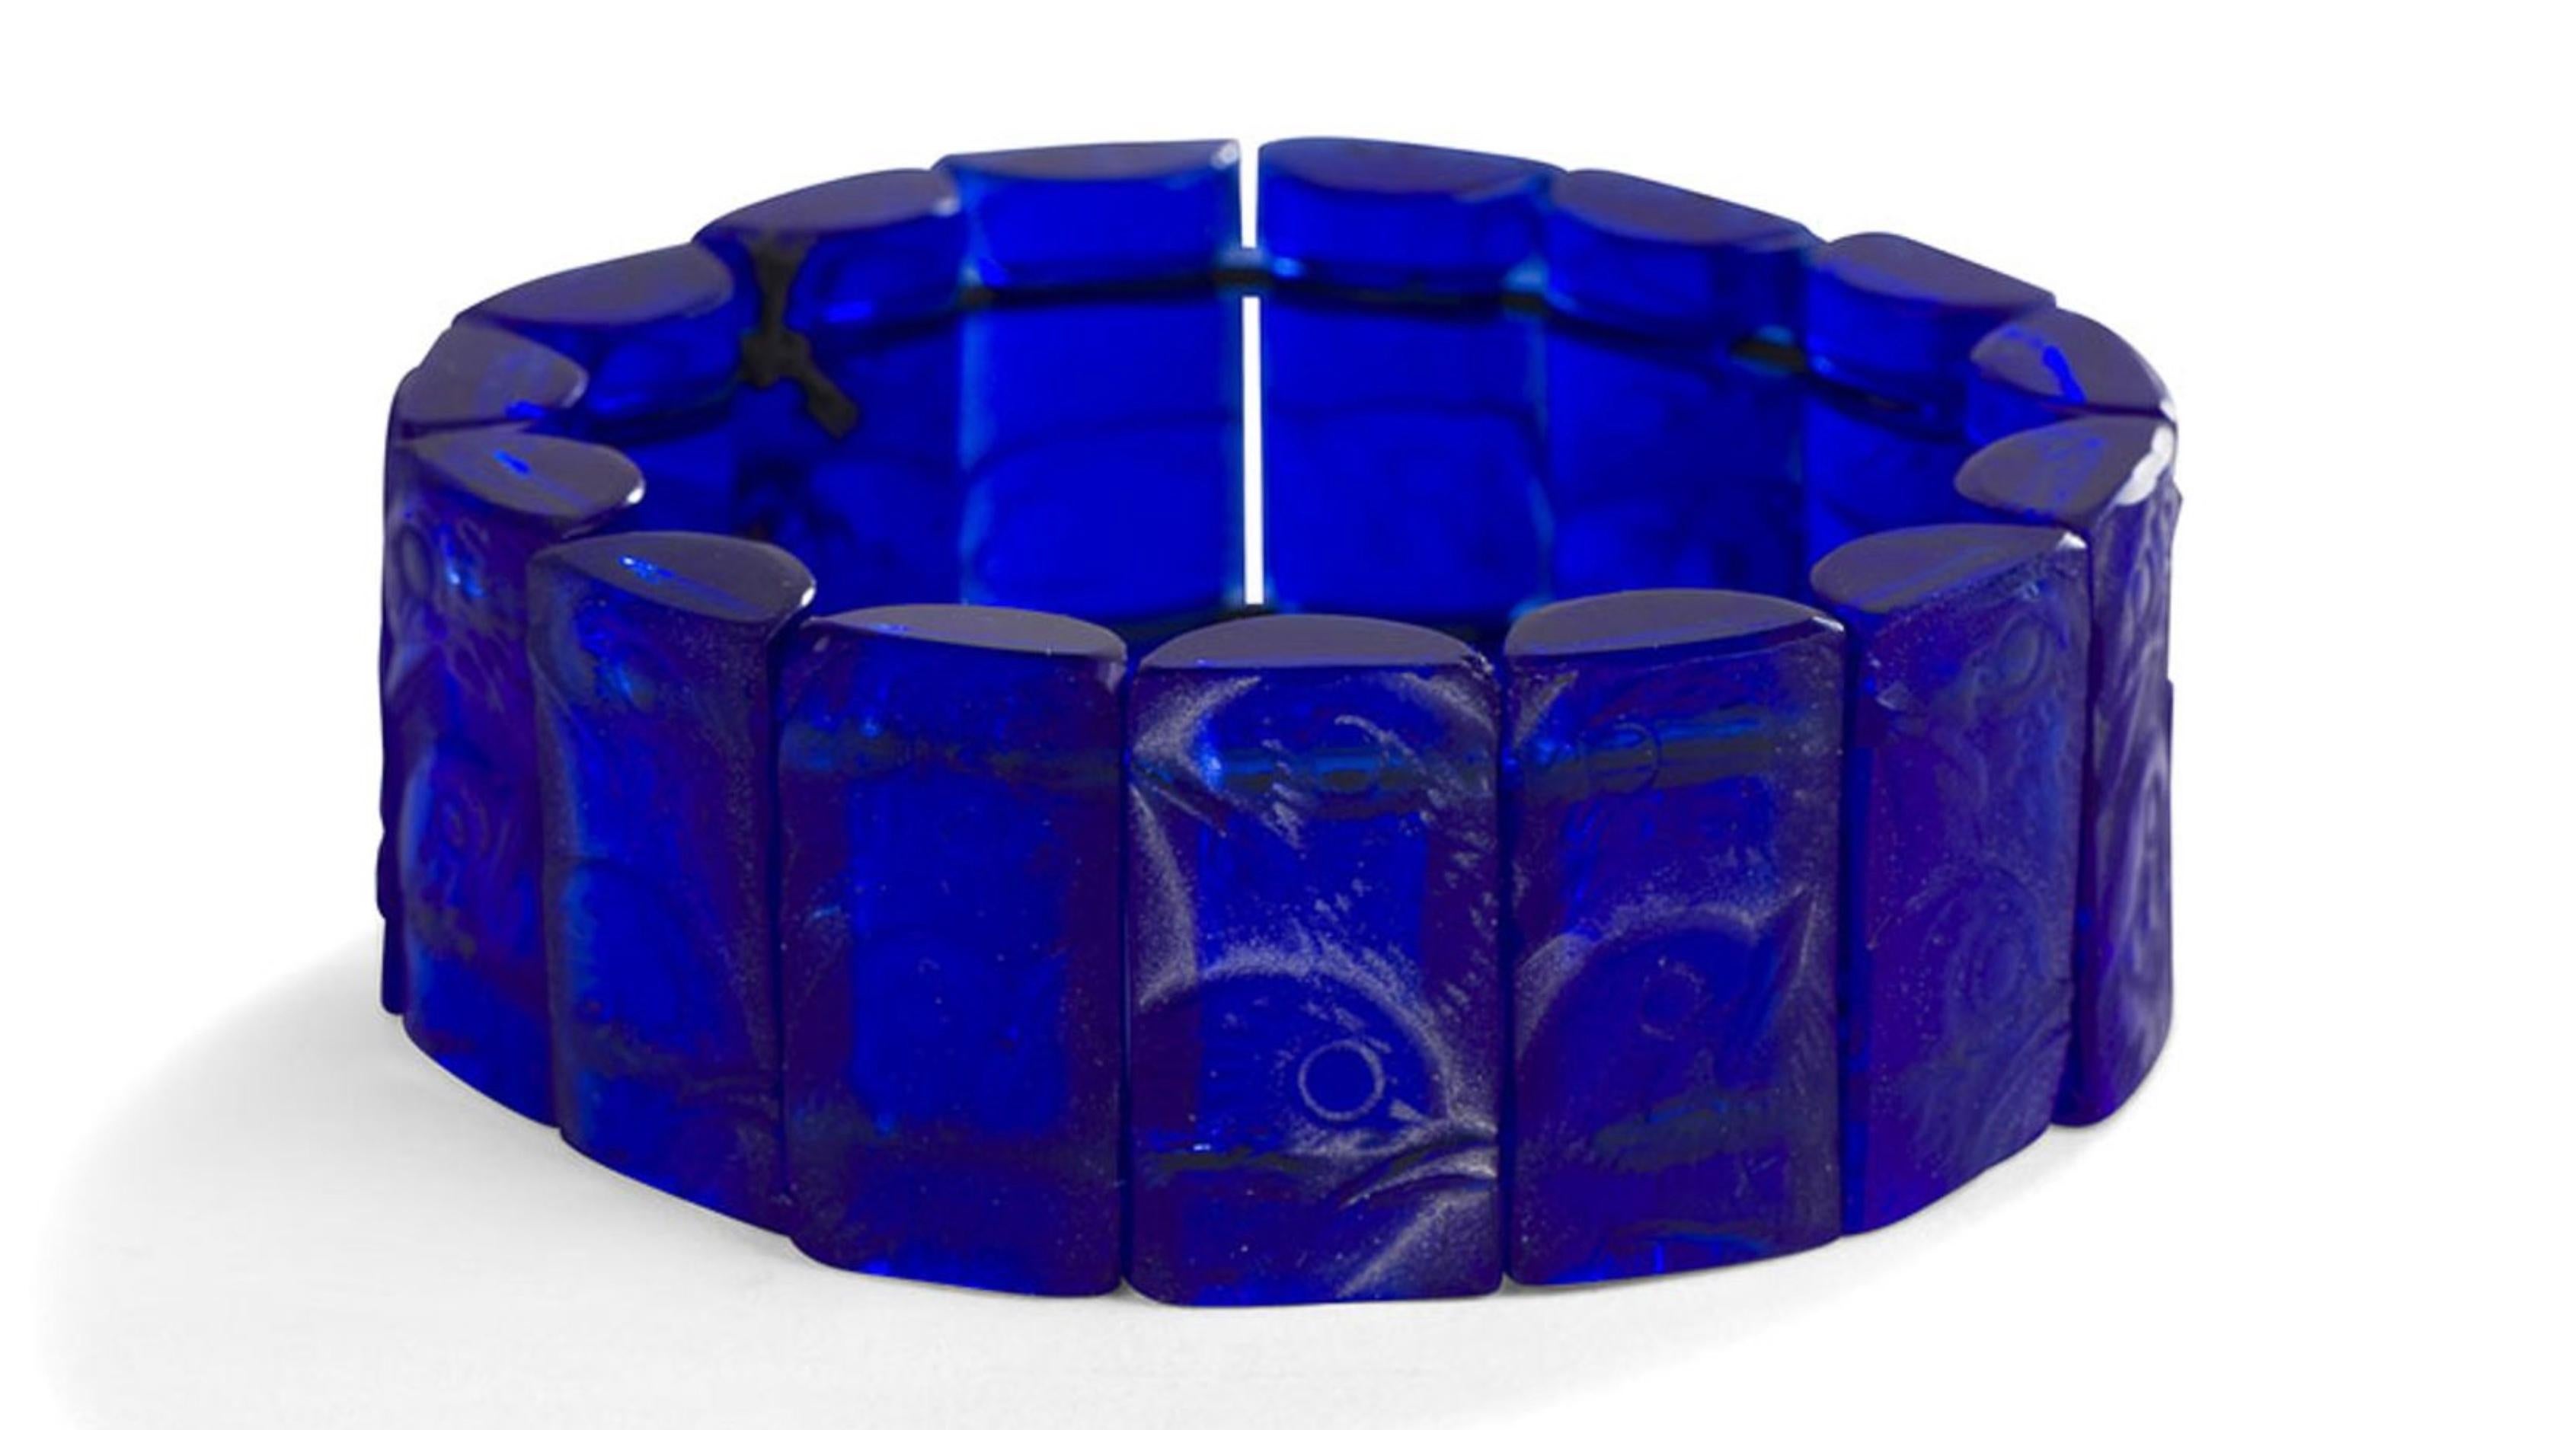 Rene Lalique Bracelet Poussins: 15 cobalt blue Rene Lalique glass pieces 1 inch by 1/2 inch strung on elastic bands.RENÉ LALIQUE (1860-1945) Poussins, model created on [January 20, 1928] and abolished in 1937 Stretch bracelet with 15 elements.